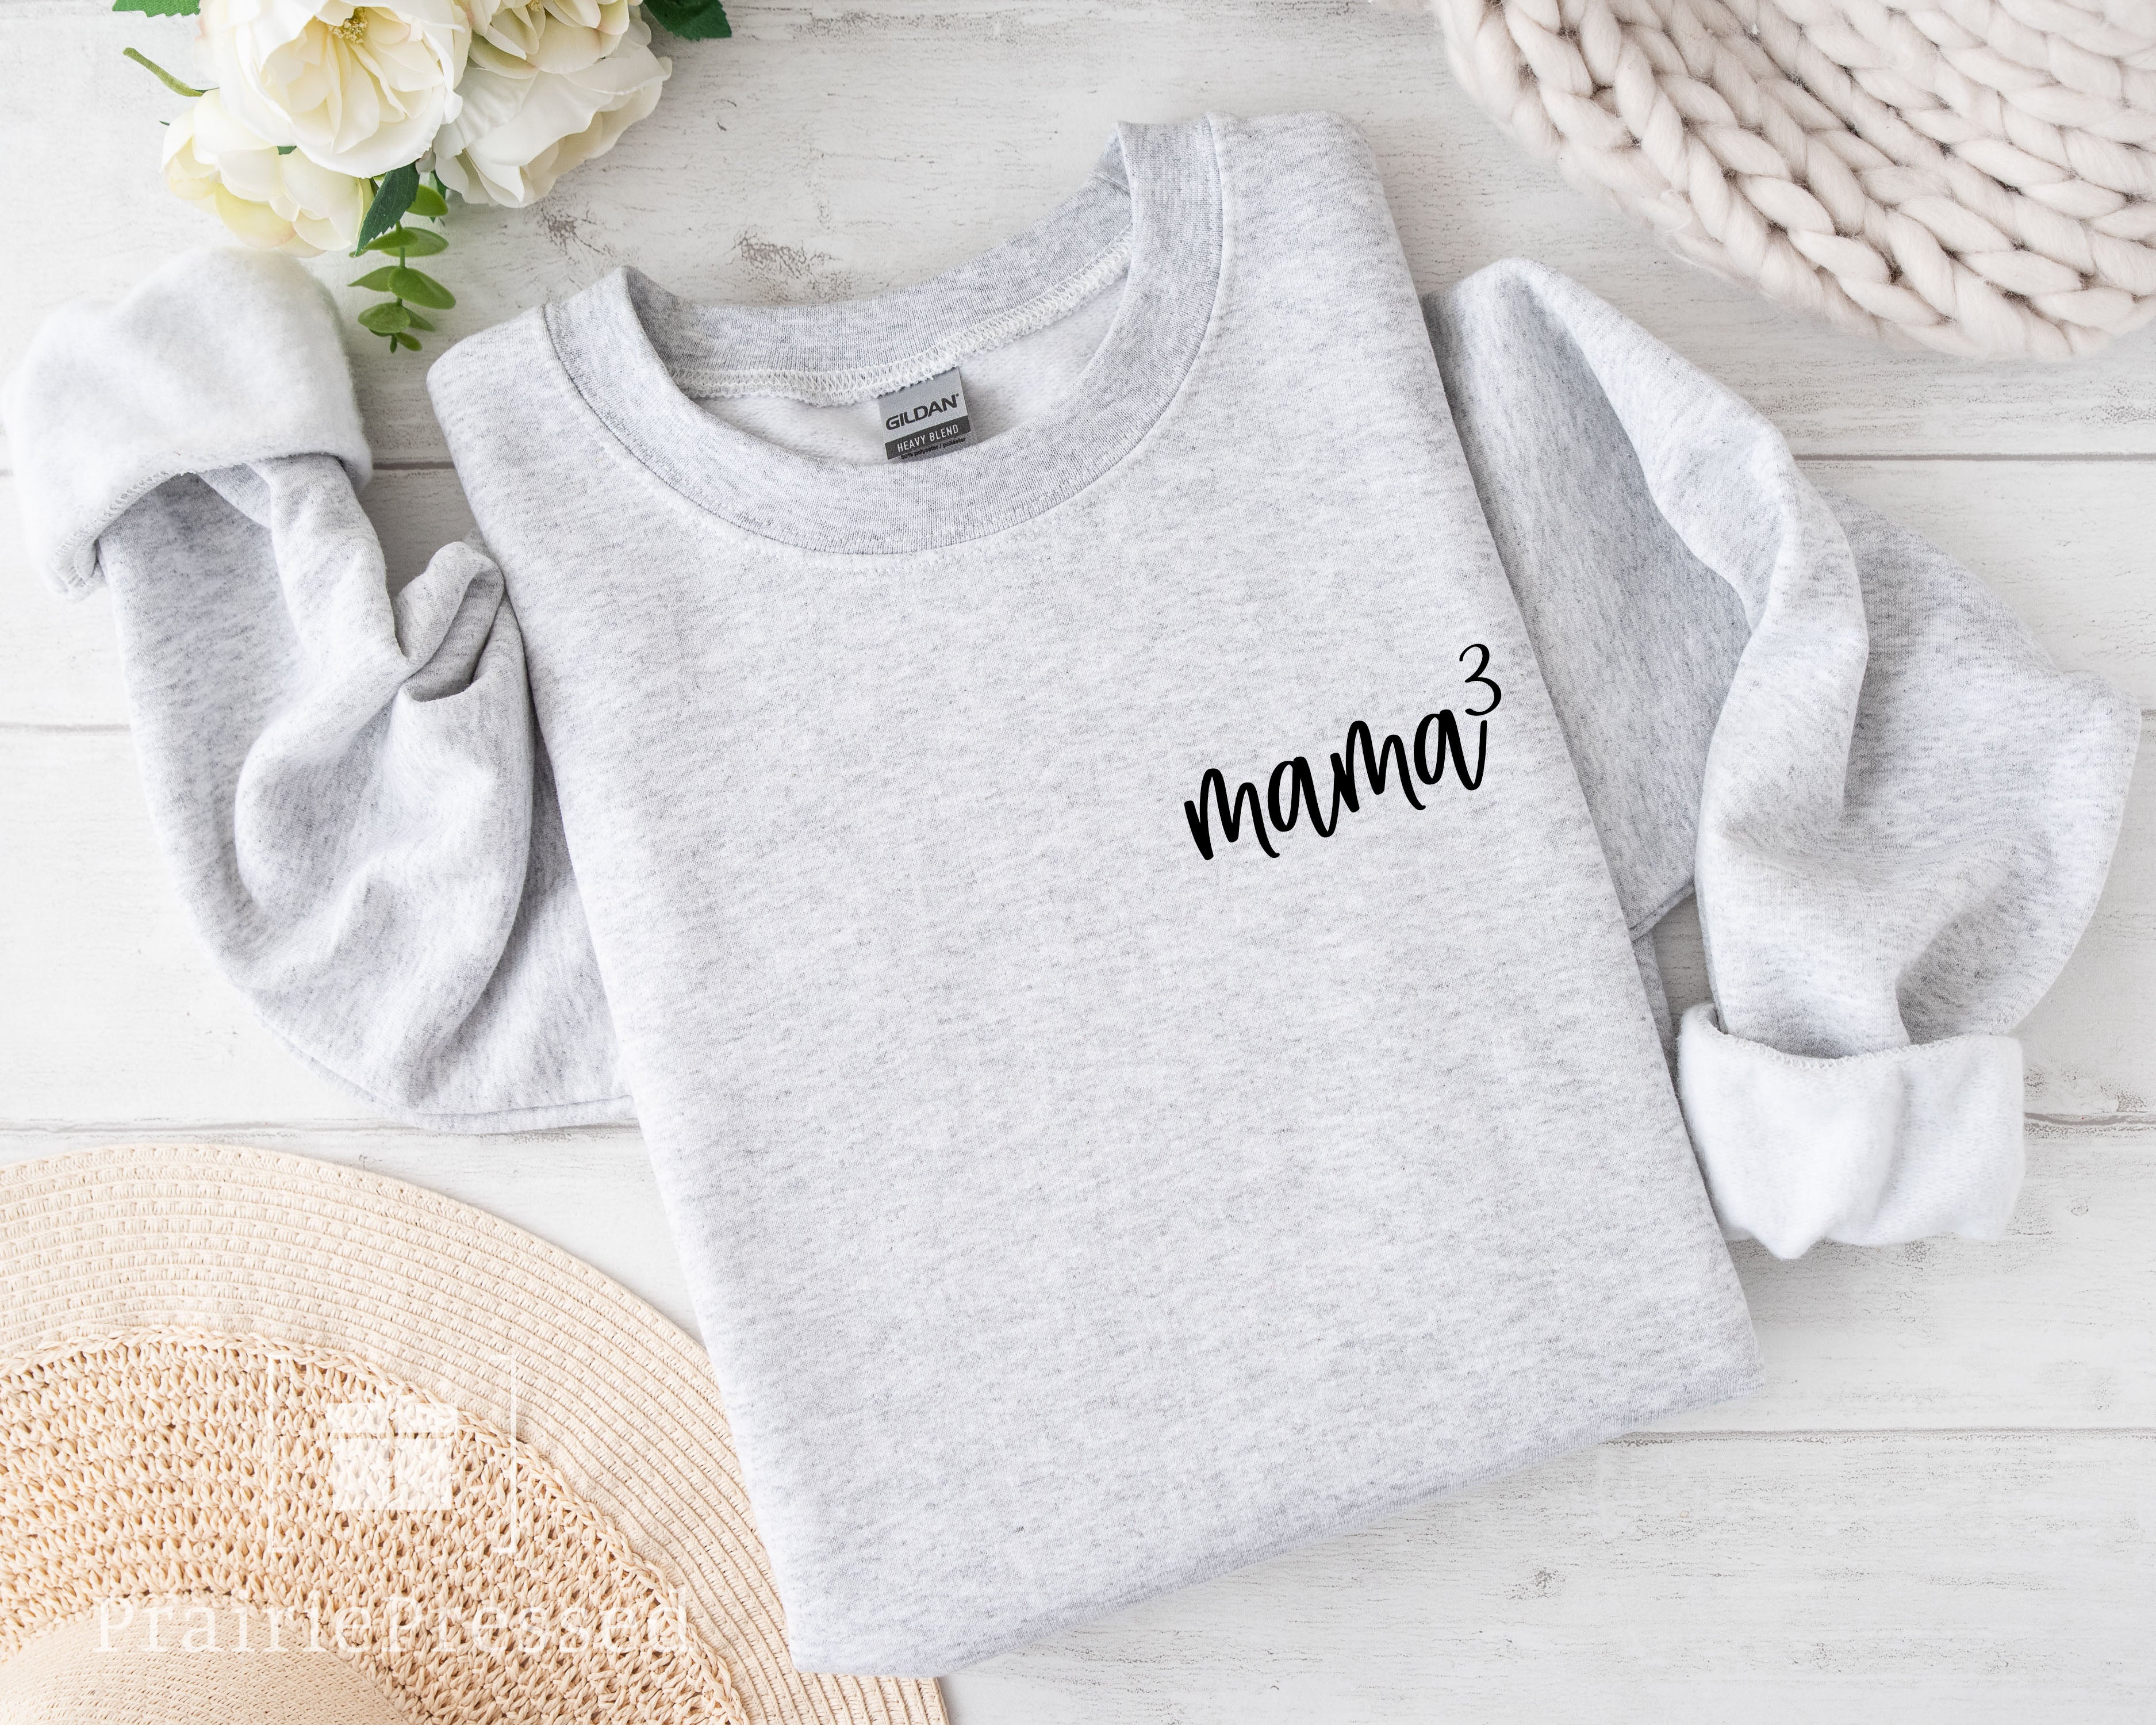 mama script on cozy crewneck sweater with the number of children - mama to the power of custom shirt